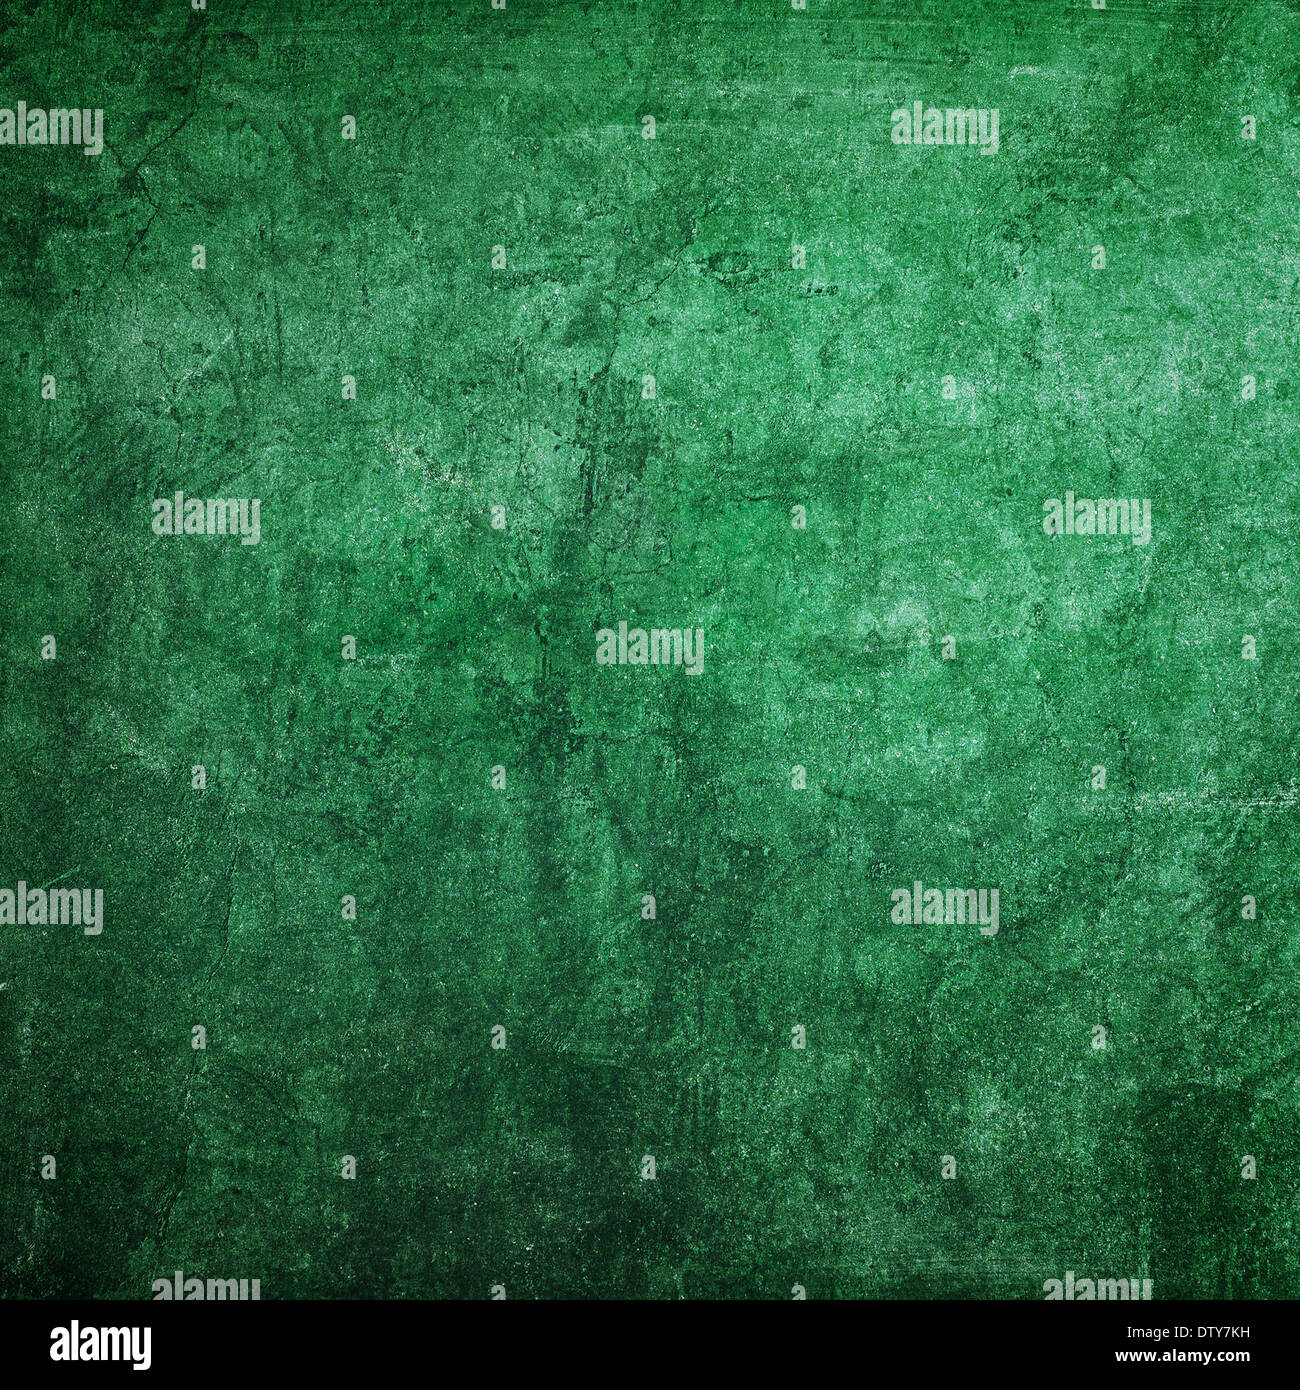 Green classroom chalkboard texture as background with copy space Stock Photo